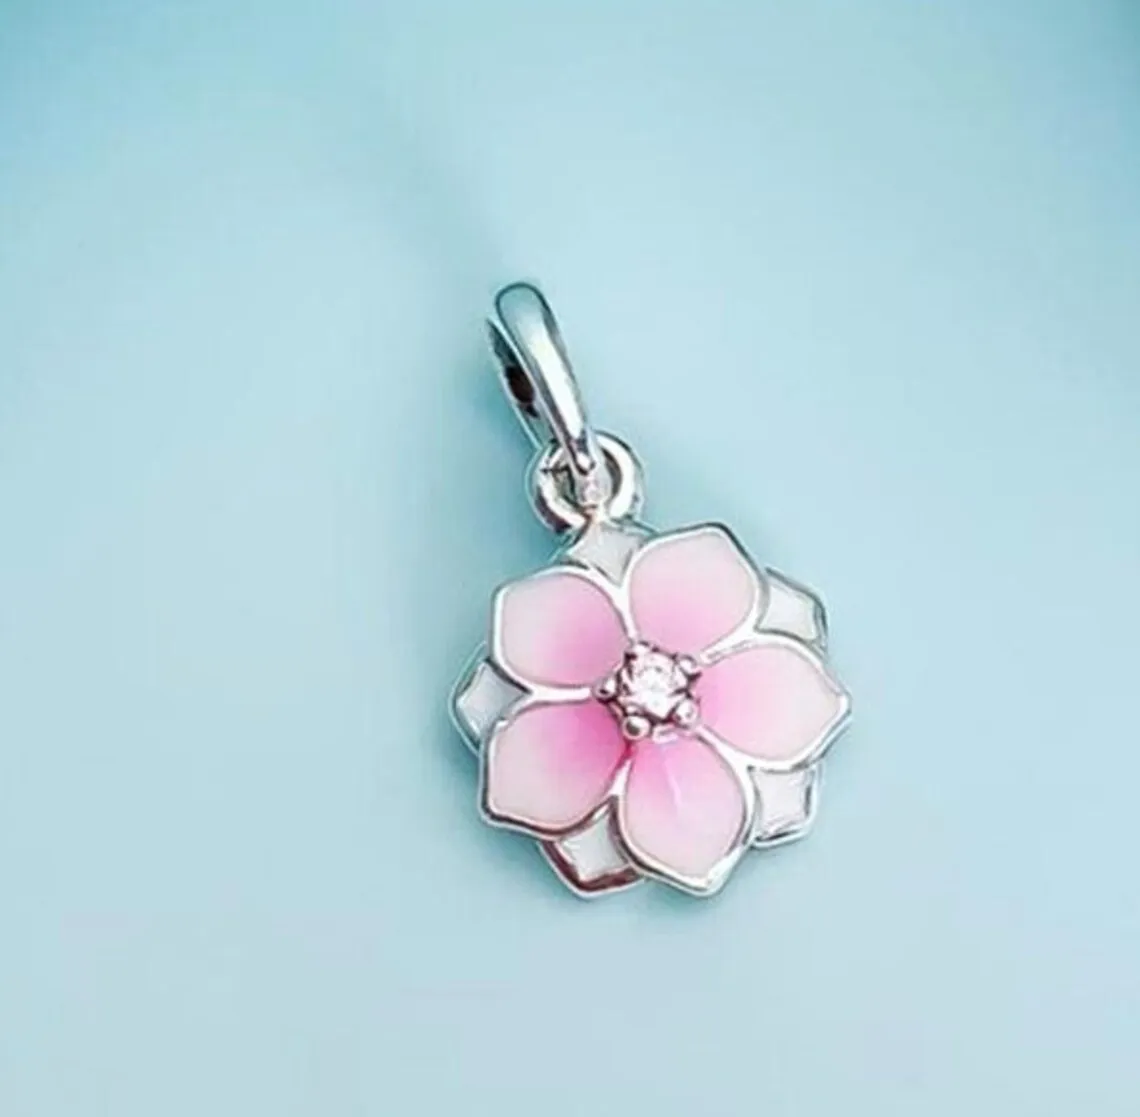 

925 Sterling Silver Pink Magnolia Bloom Pendant Charm Bead Fits All European Pandora Jewelry Bracelets Necklaces